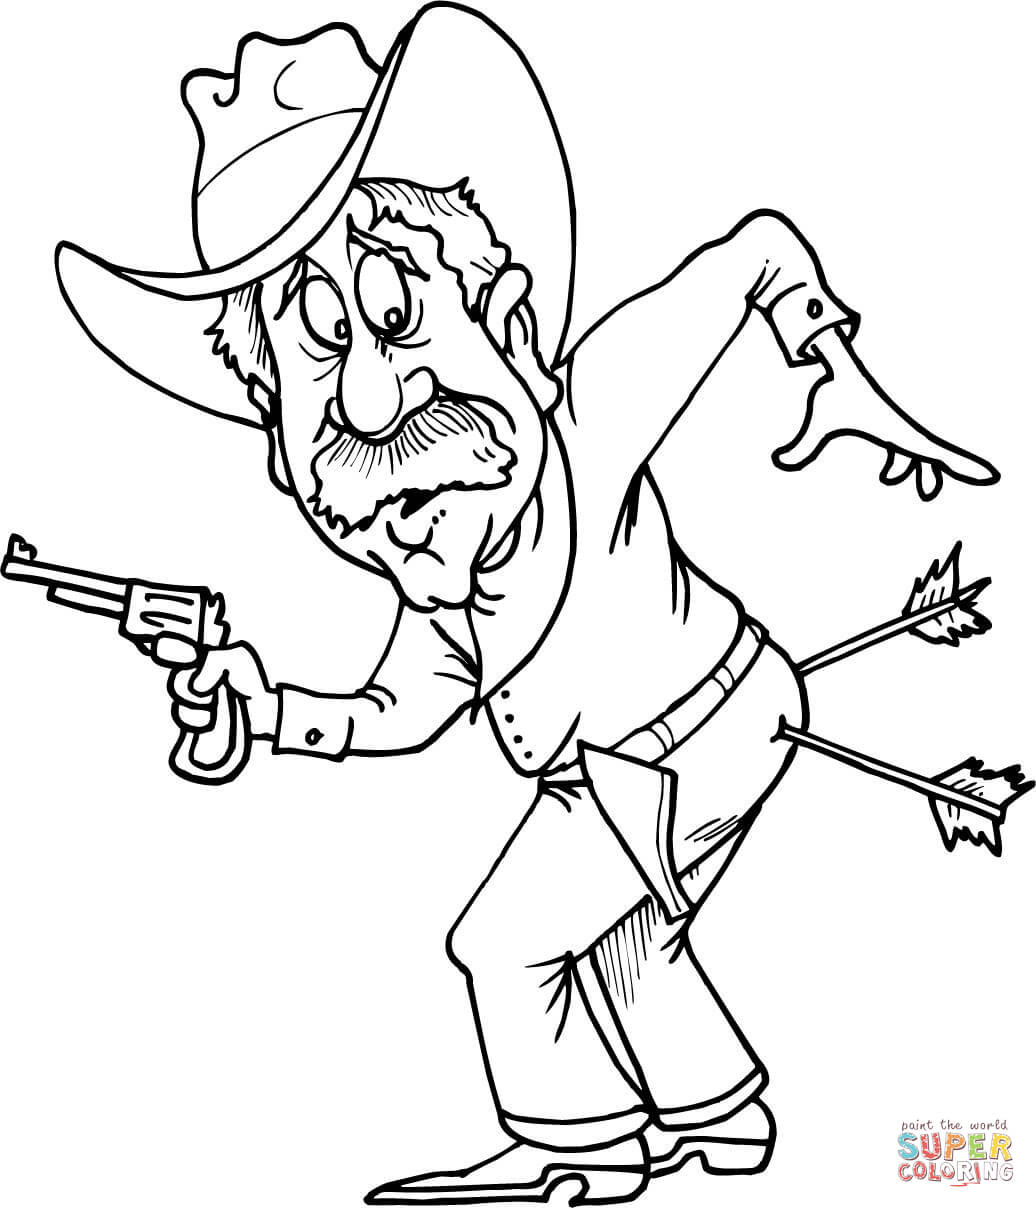 Cowboy with Two Arrows in Butt coloring page | Free Printable Coloring Pages